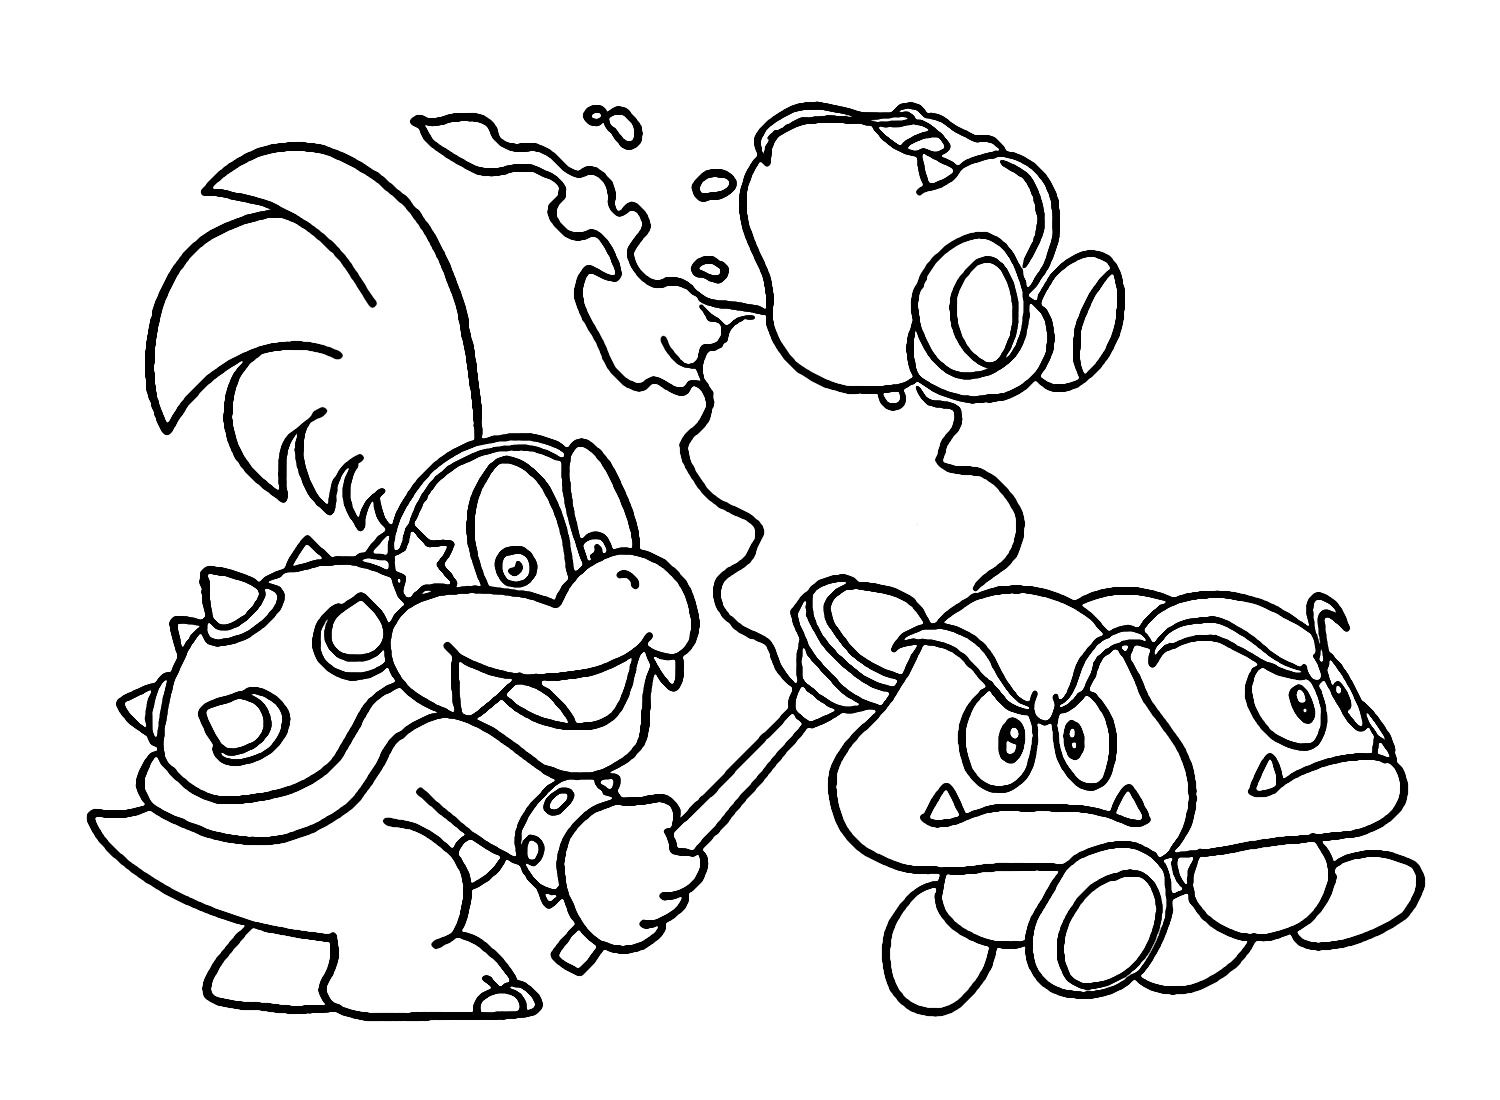 Pictures Koopalings Coloring Page